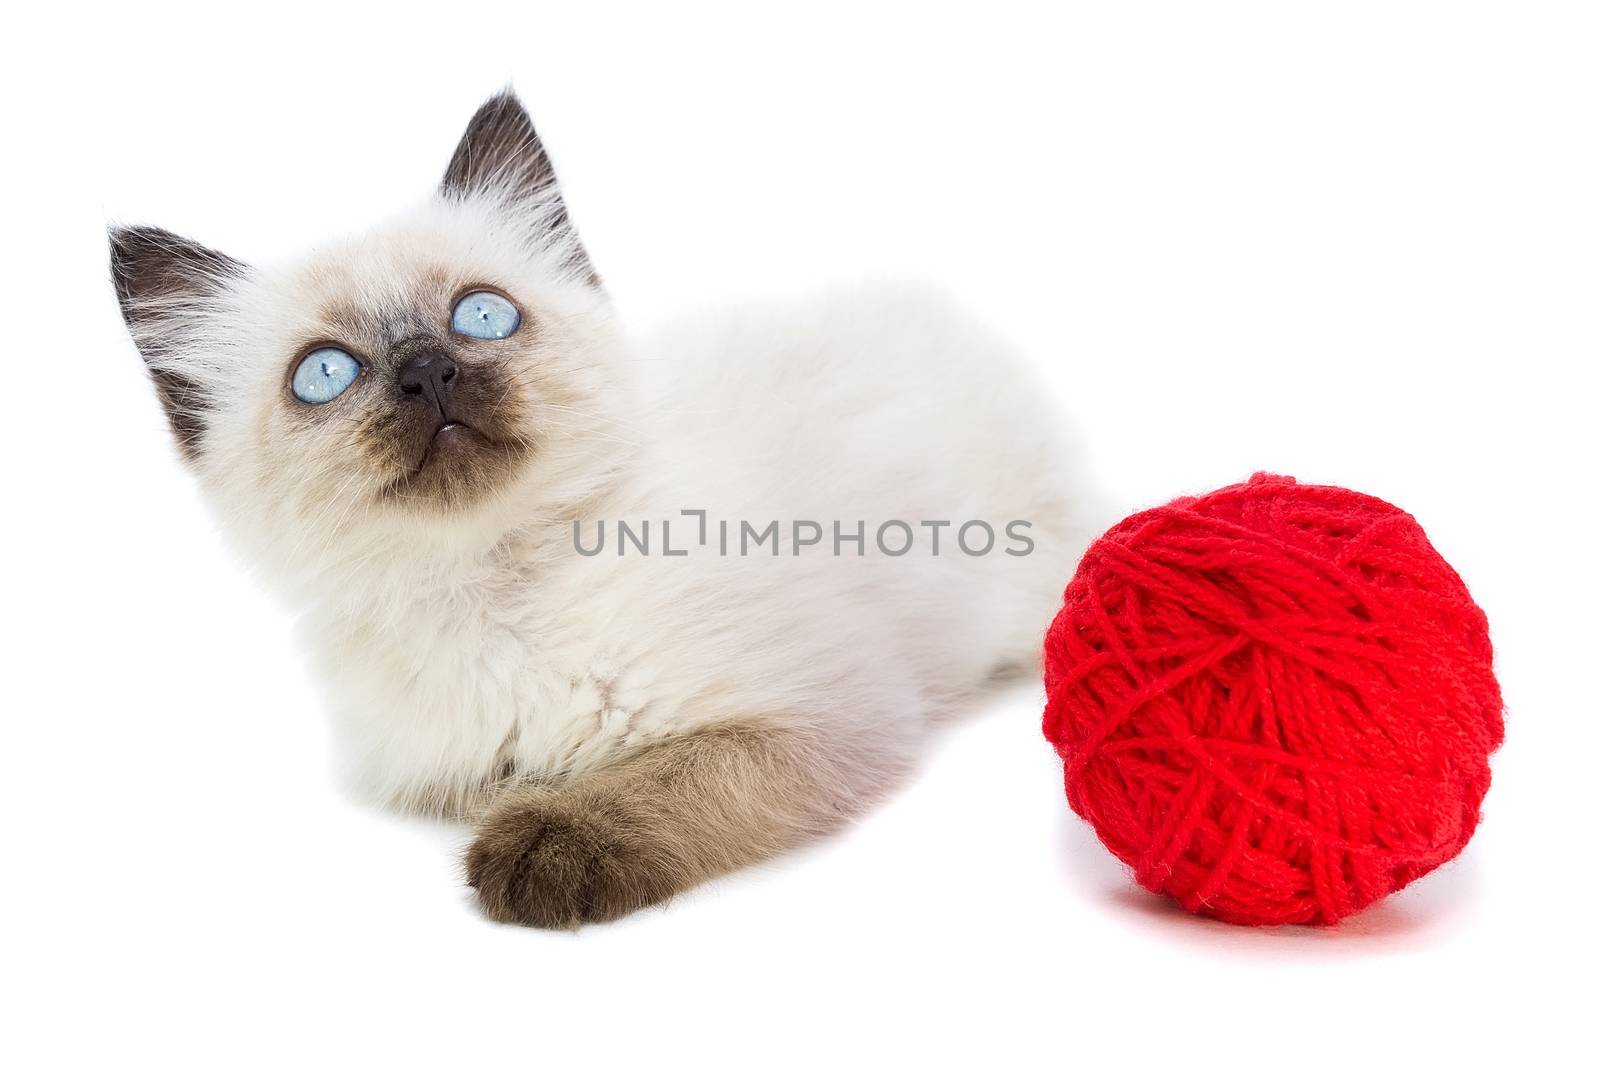 Kitten on white background, kitten playing with ball, summer, Siamese cat